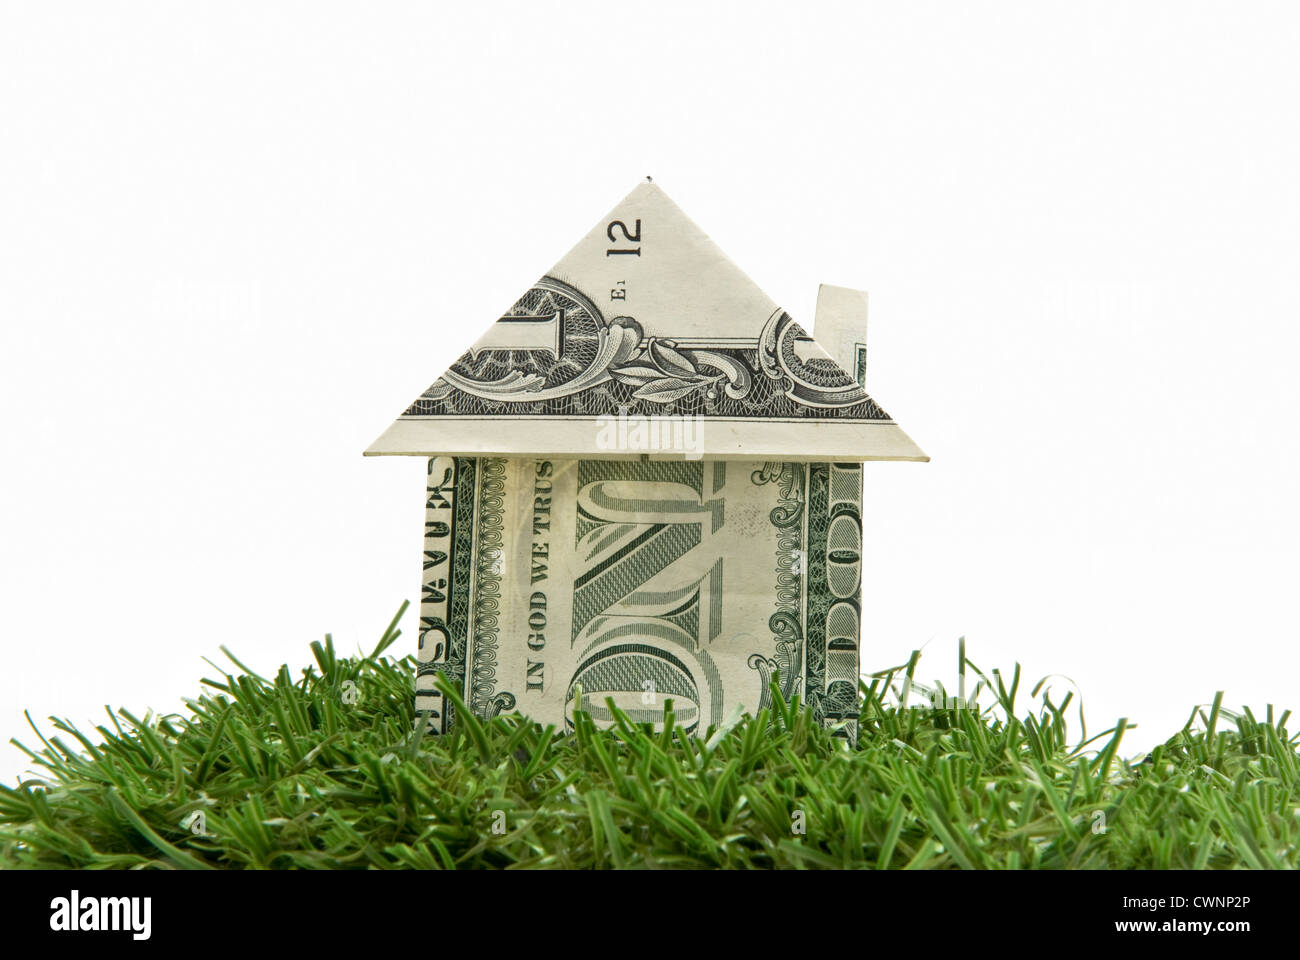 House folded from a dollar bill on artificial turf, white background Stock Photo